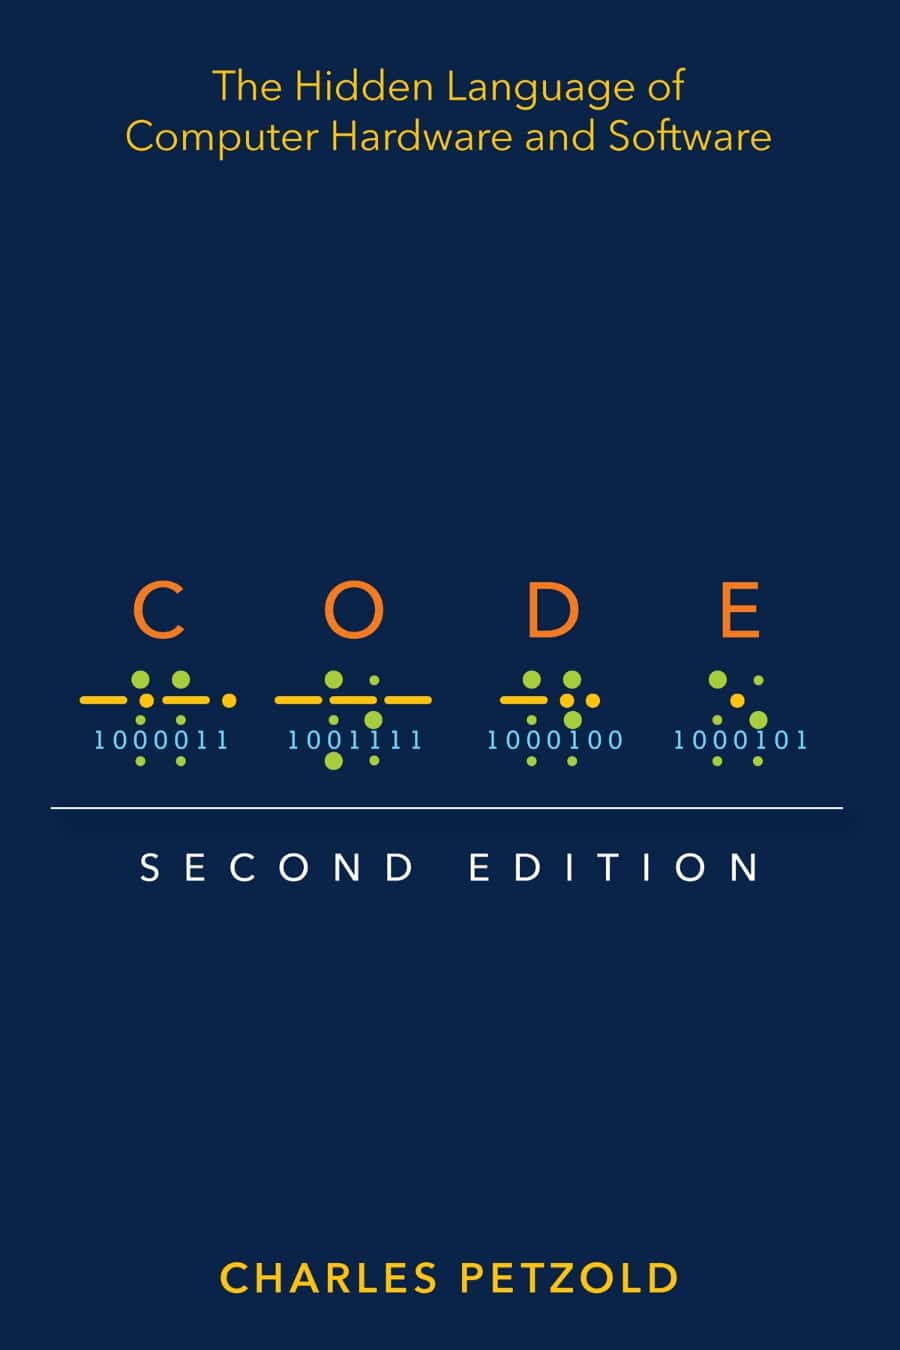 Book cover of "Code: The Hidden Language of Computer Hardware and Software"